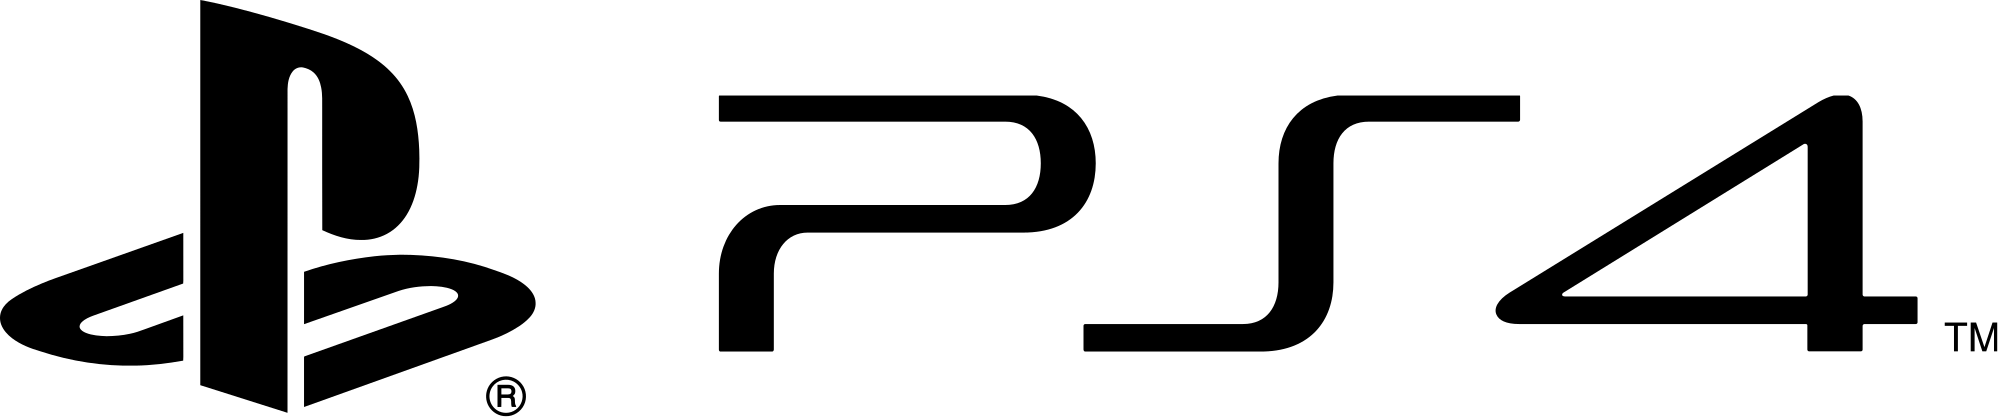 PS4 PlayStation 4 Logo - File:PlayStation 4 logo and wordmark.svg - Wikimedia Commons